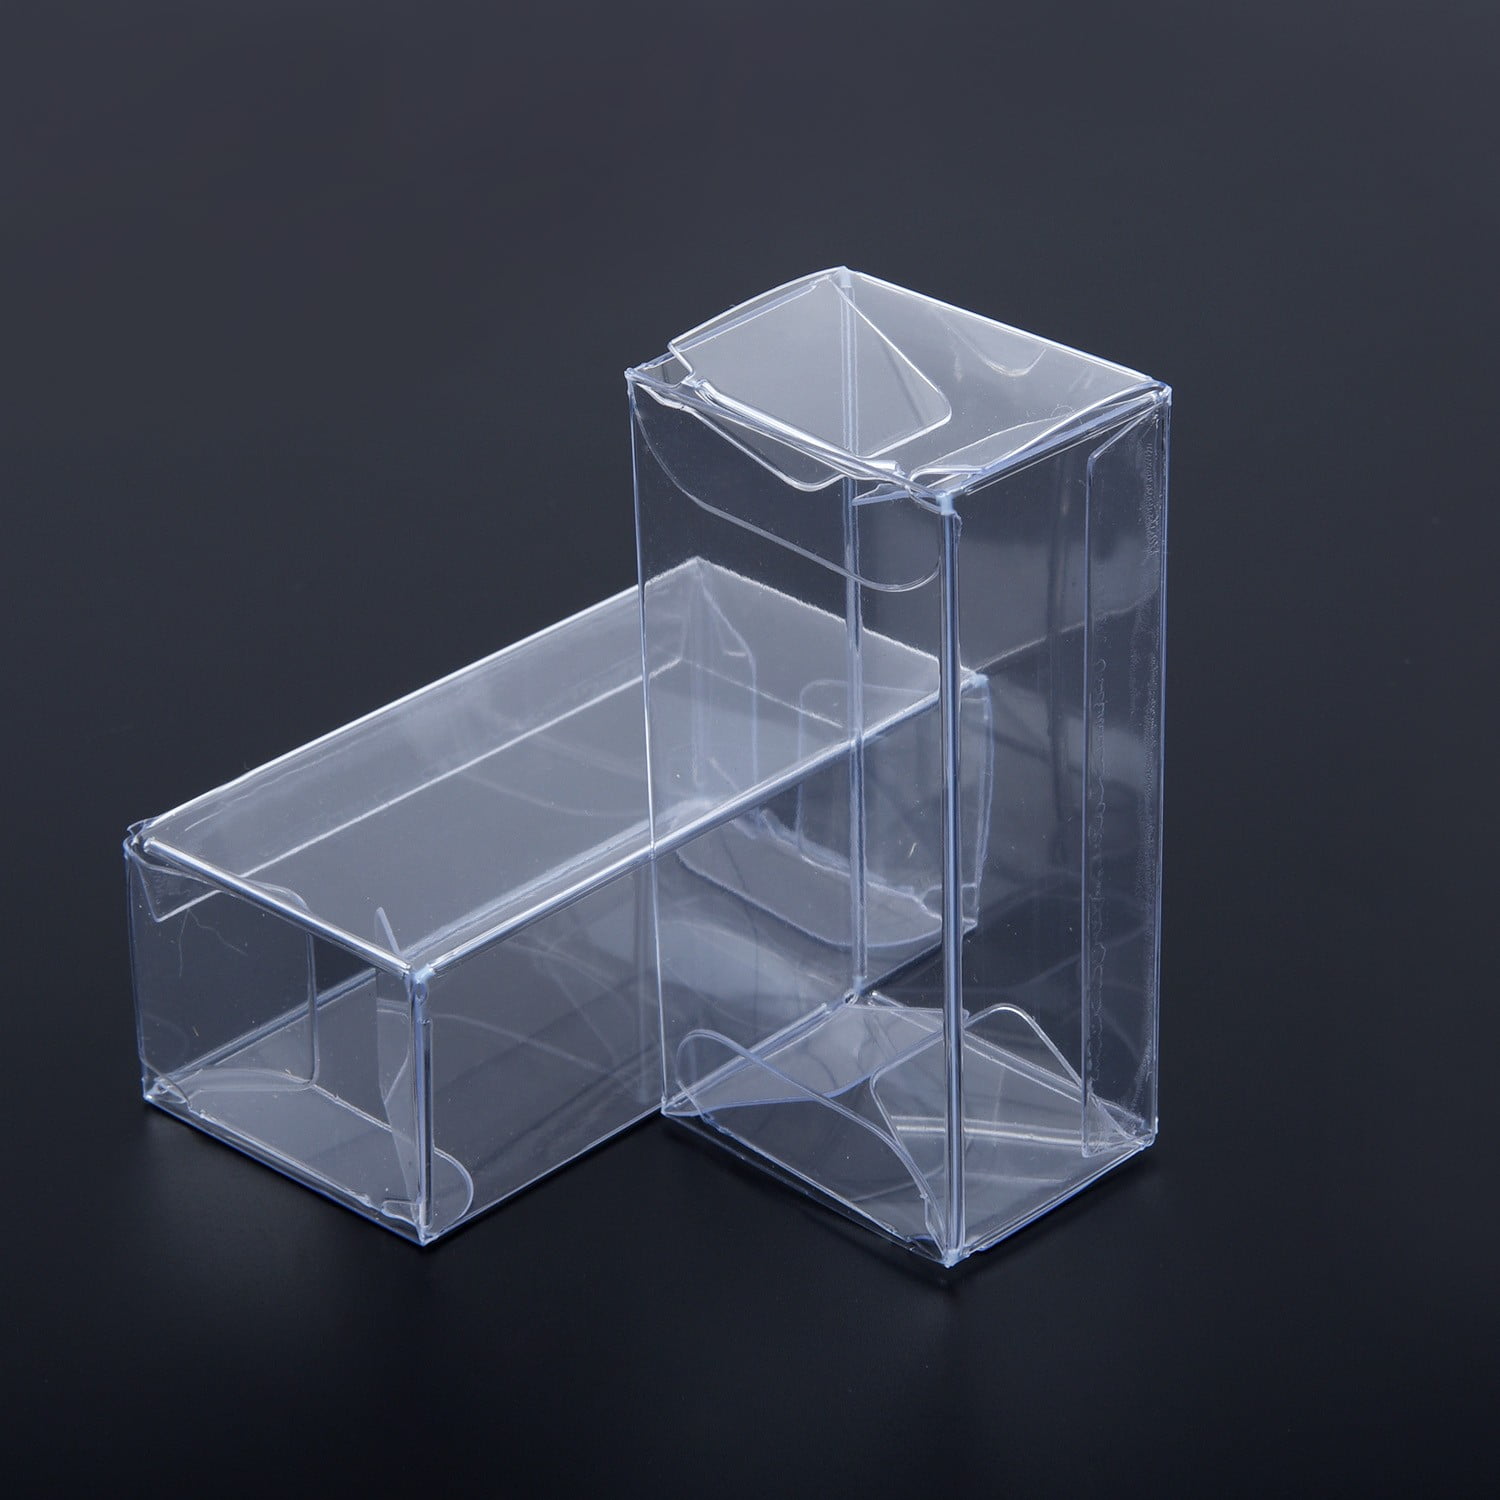 25x Display Box 1:64 Clear Plastic PVC Case Cover Show For Diecast Model Car Toy 